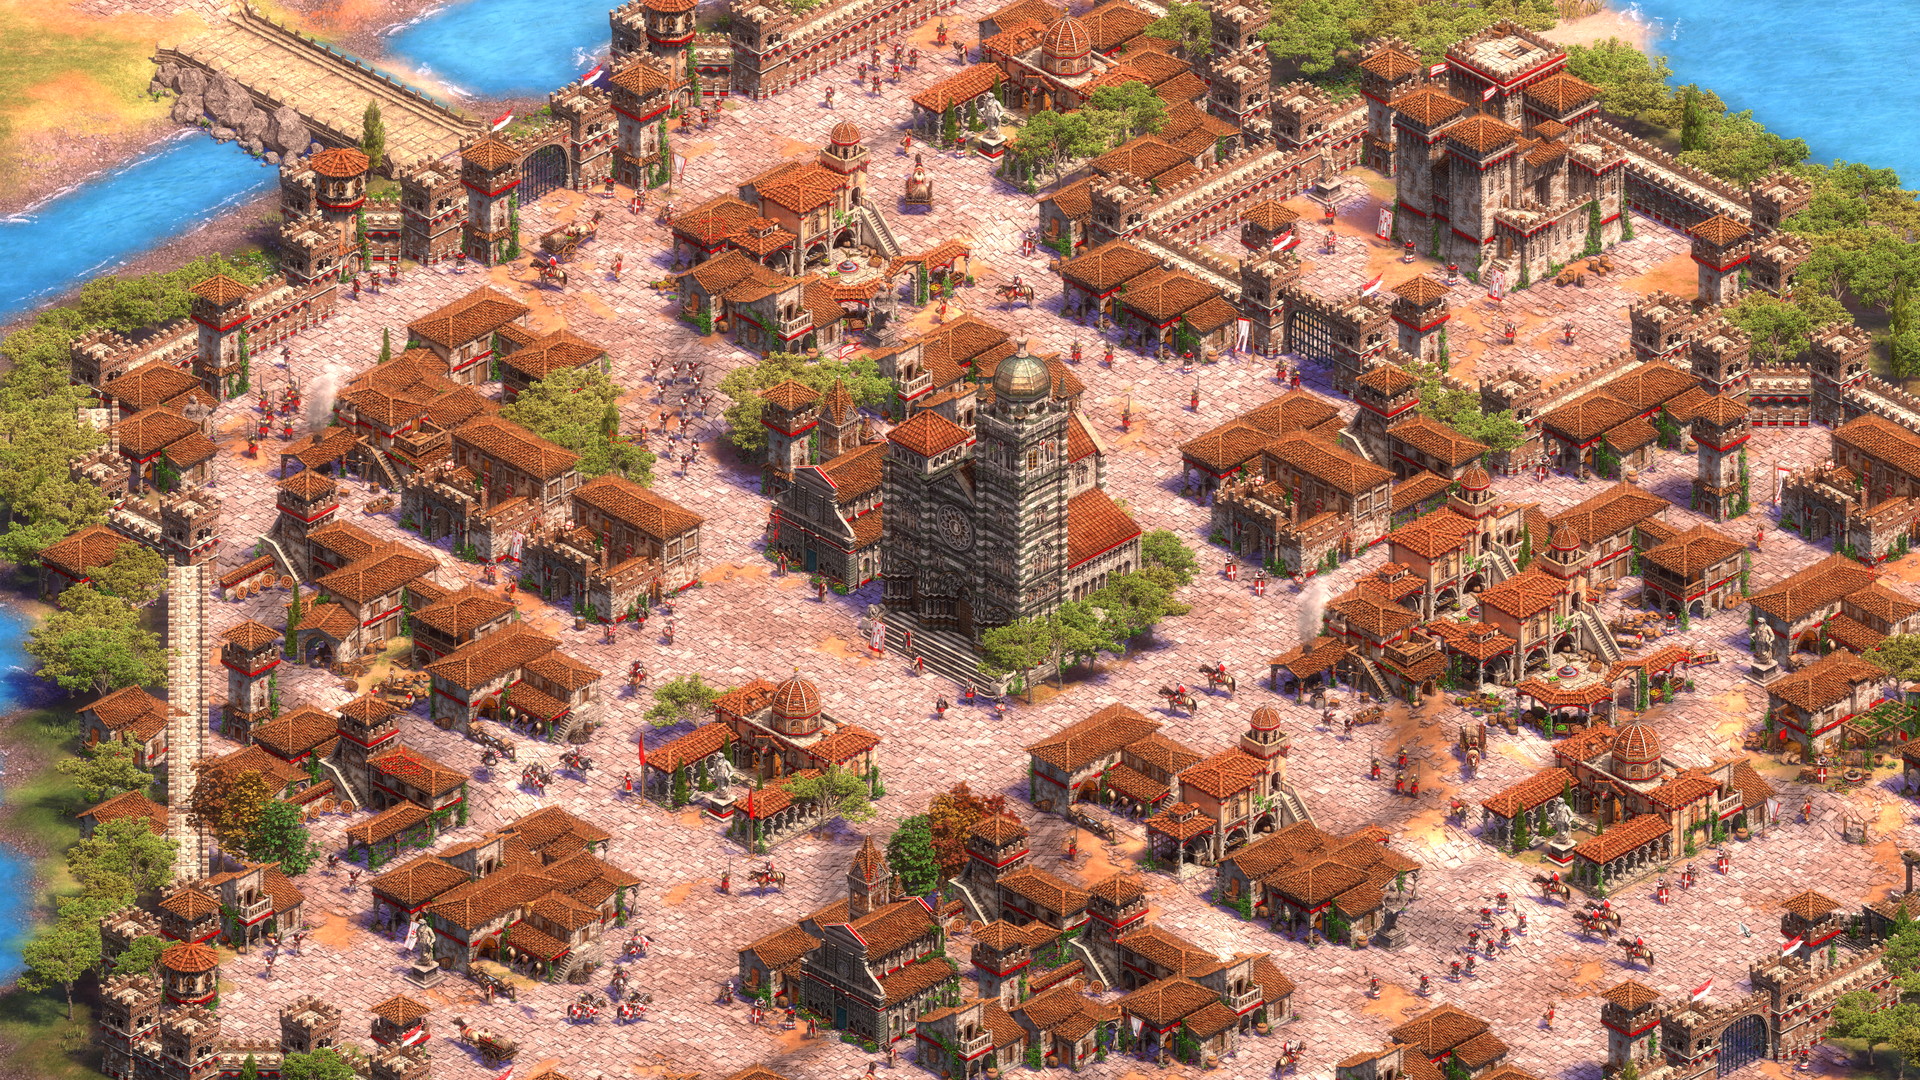 Age of Empires II: Definitive Edition - screenshot 8